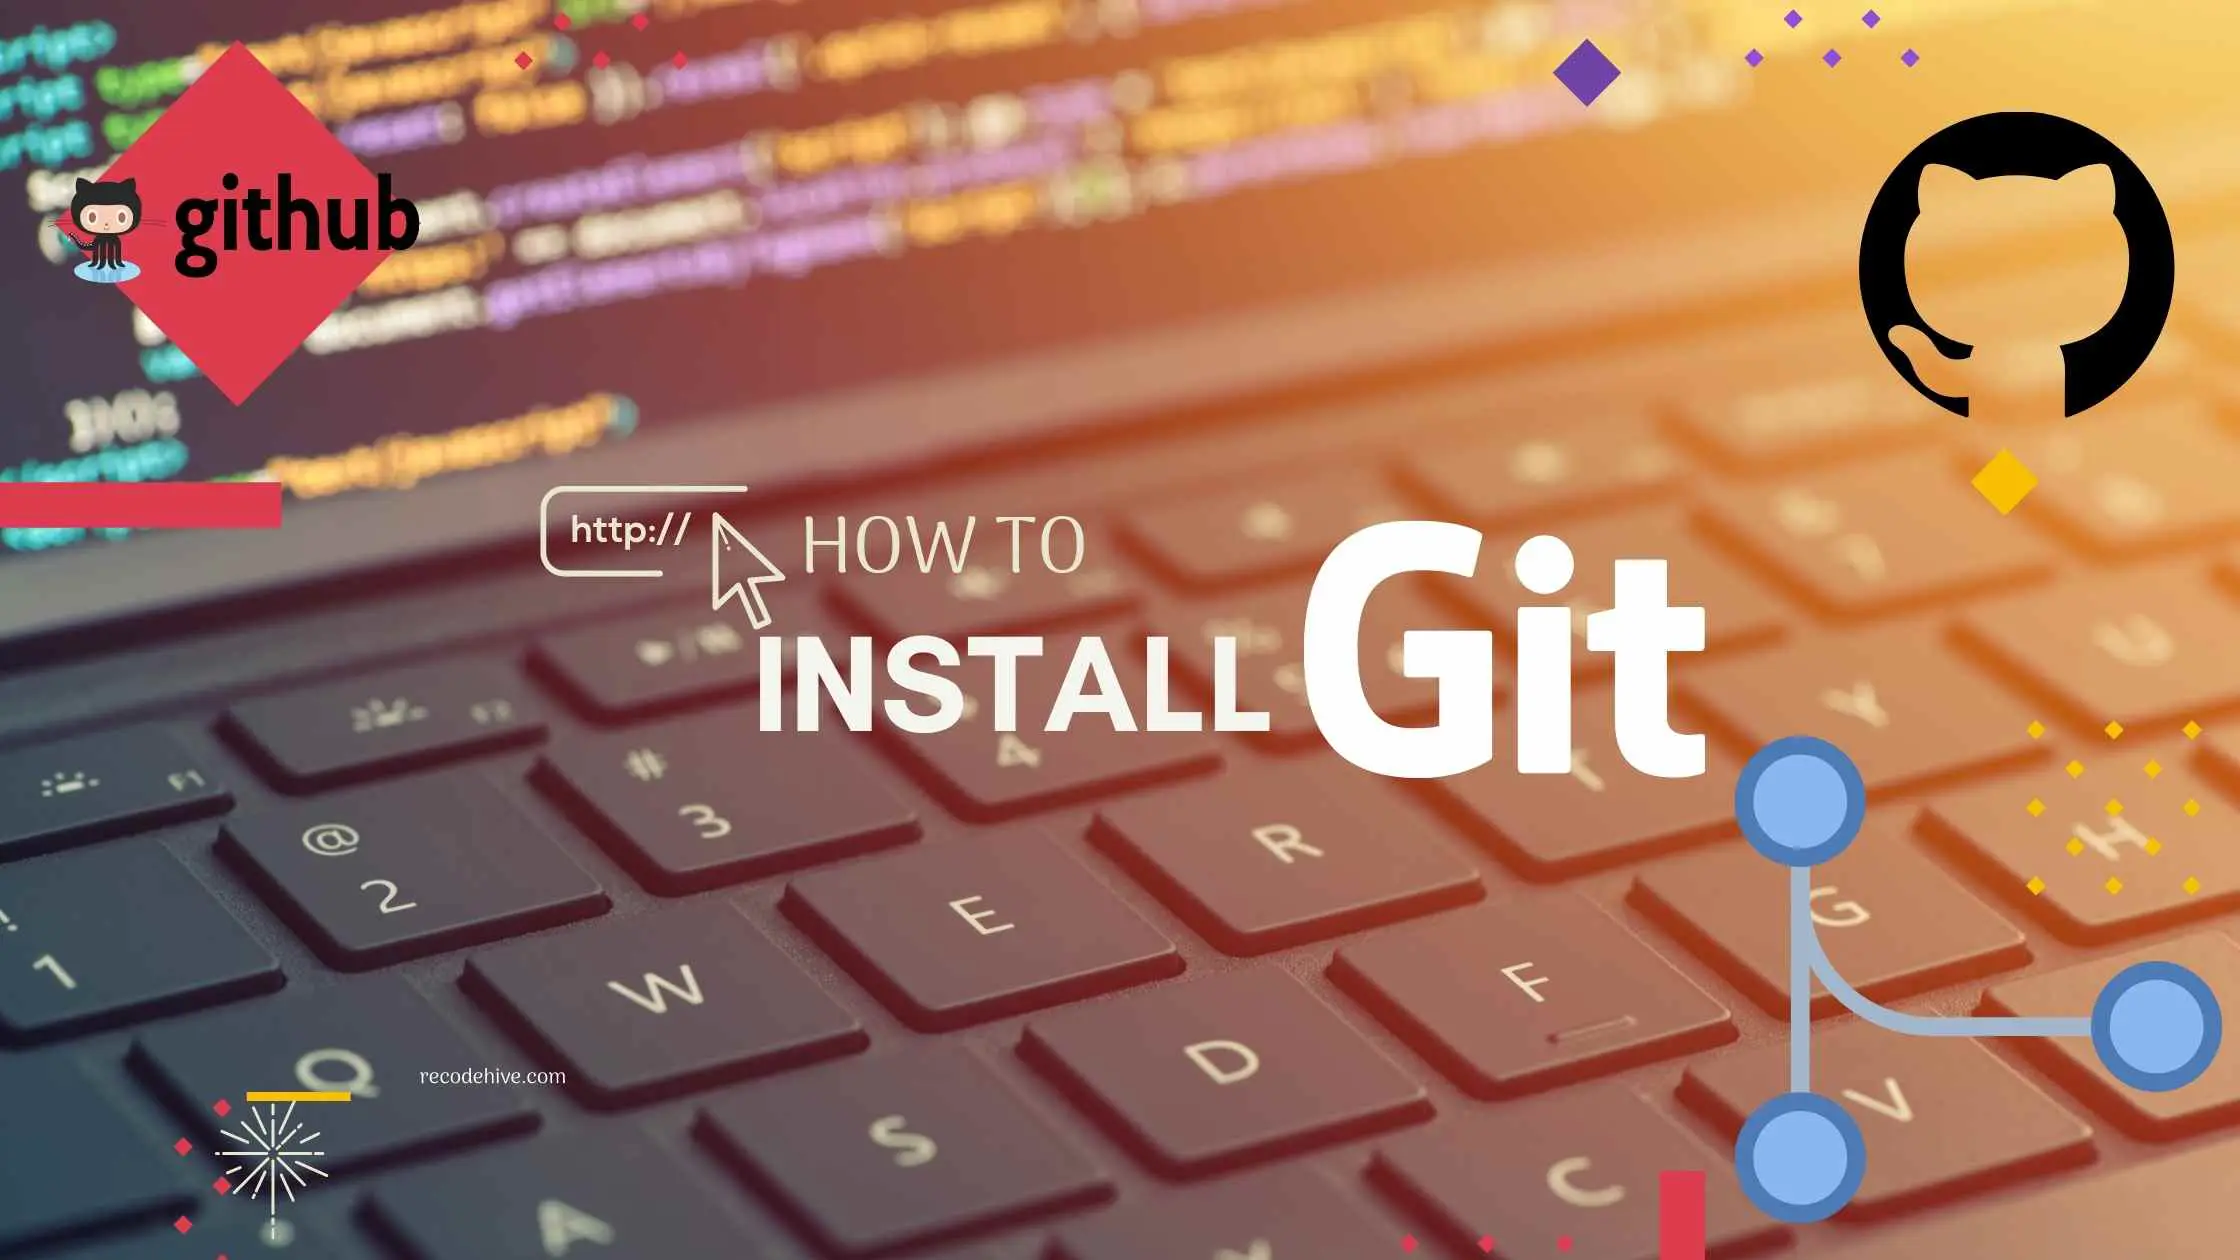 how to download git on mac